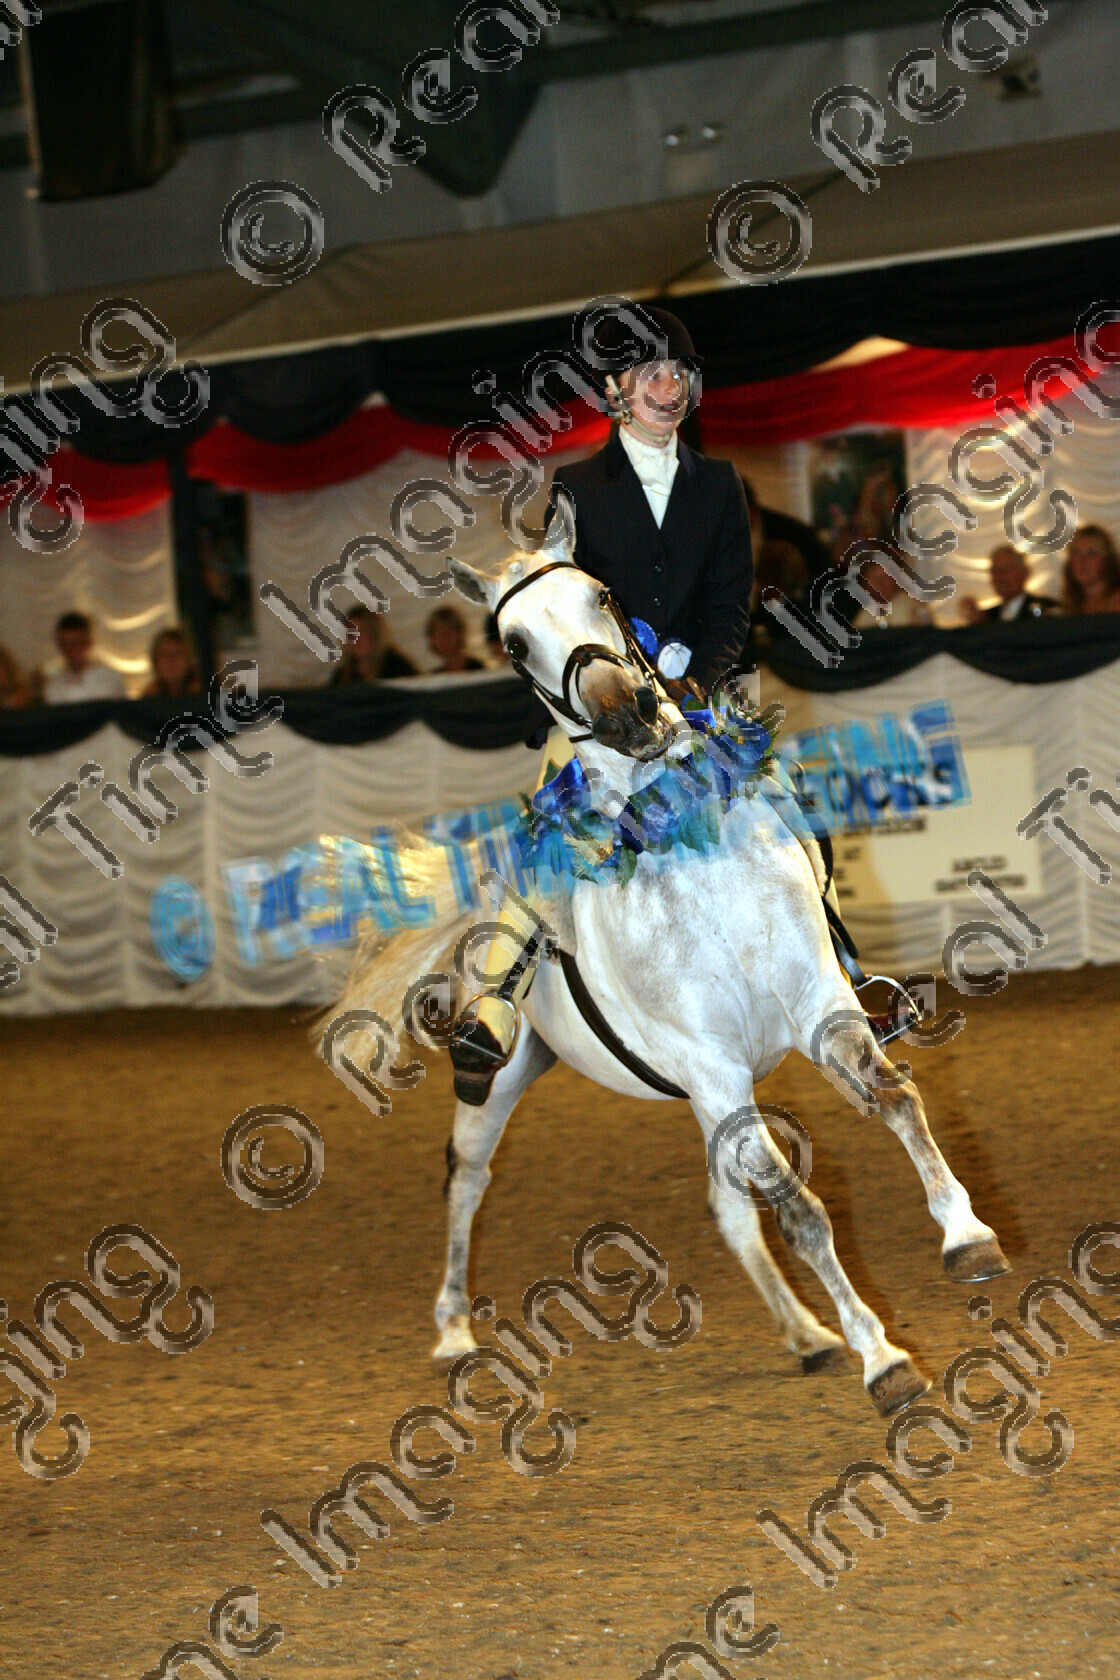 S06-54-13-208 
 Keywords: BSPS Summer Championships Show British Show Pony Society Dapple grey gray THE BSPS "COOPER CORPORATION" DESERT ORCHID BLUE RIBAND WHP OF THE YEAR CHAMPIONSHIP
CHAMPION  HANKEY PANKEY cantering canter action lap of honour sash rosette rosettes